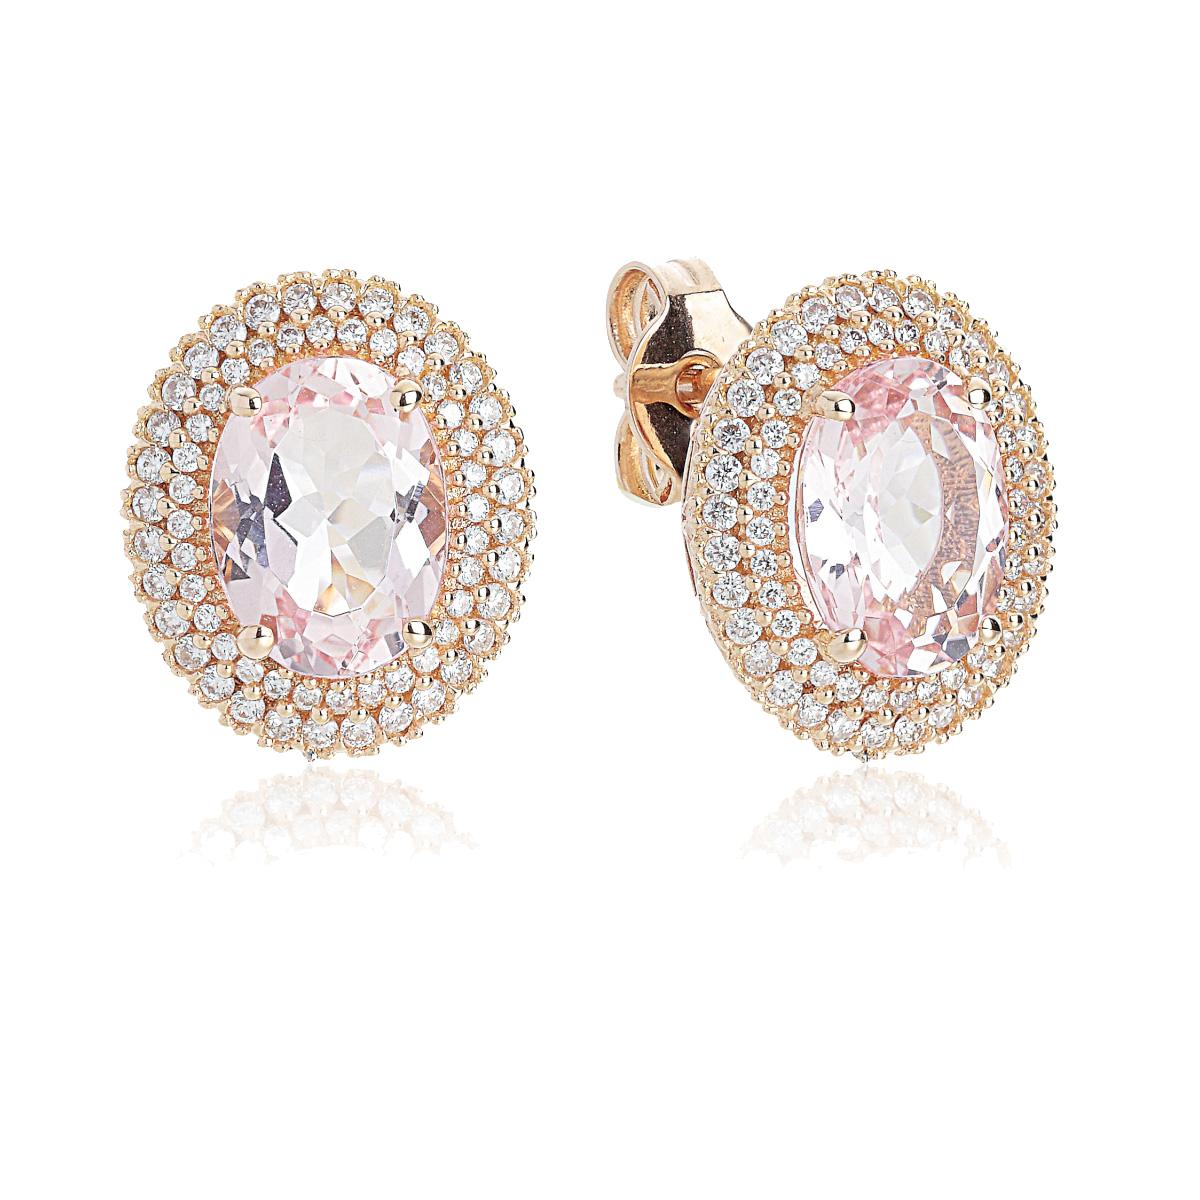 18kt gold earrings with Morganite and diamonds - OD219/MO-LR